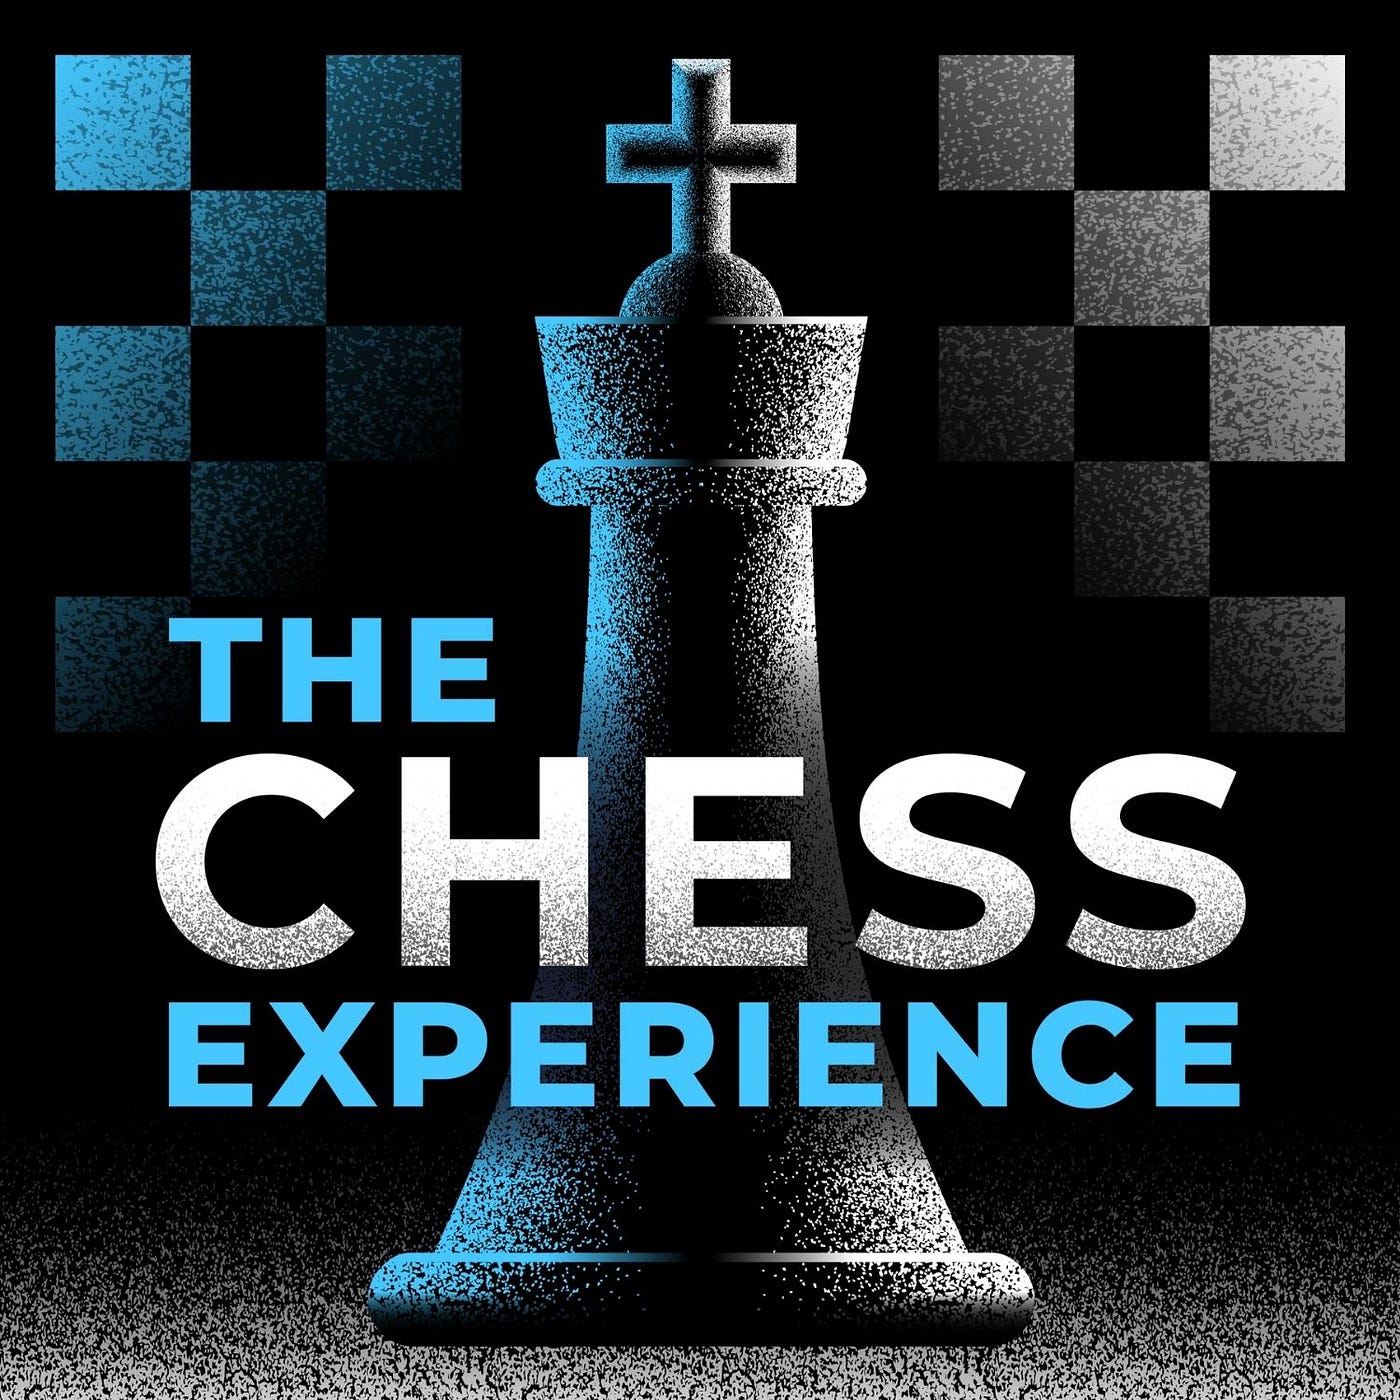 From 1400 to 2000 in Blitz on Chess.com - A 10½ Year Journey